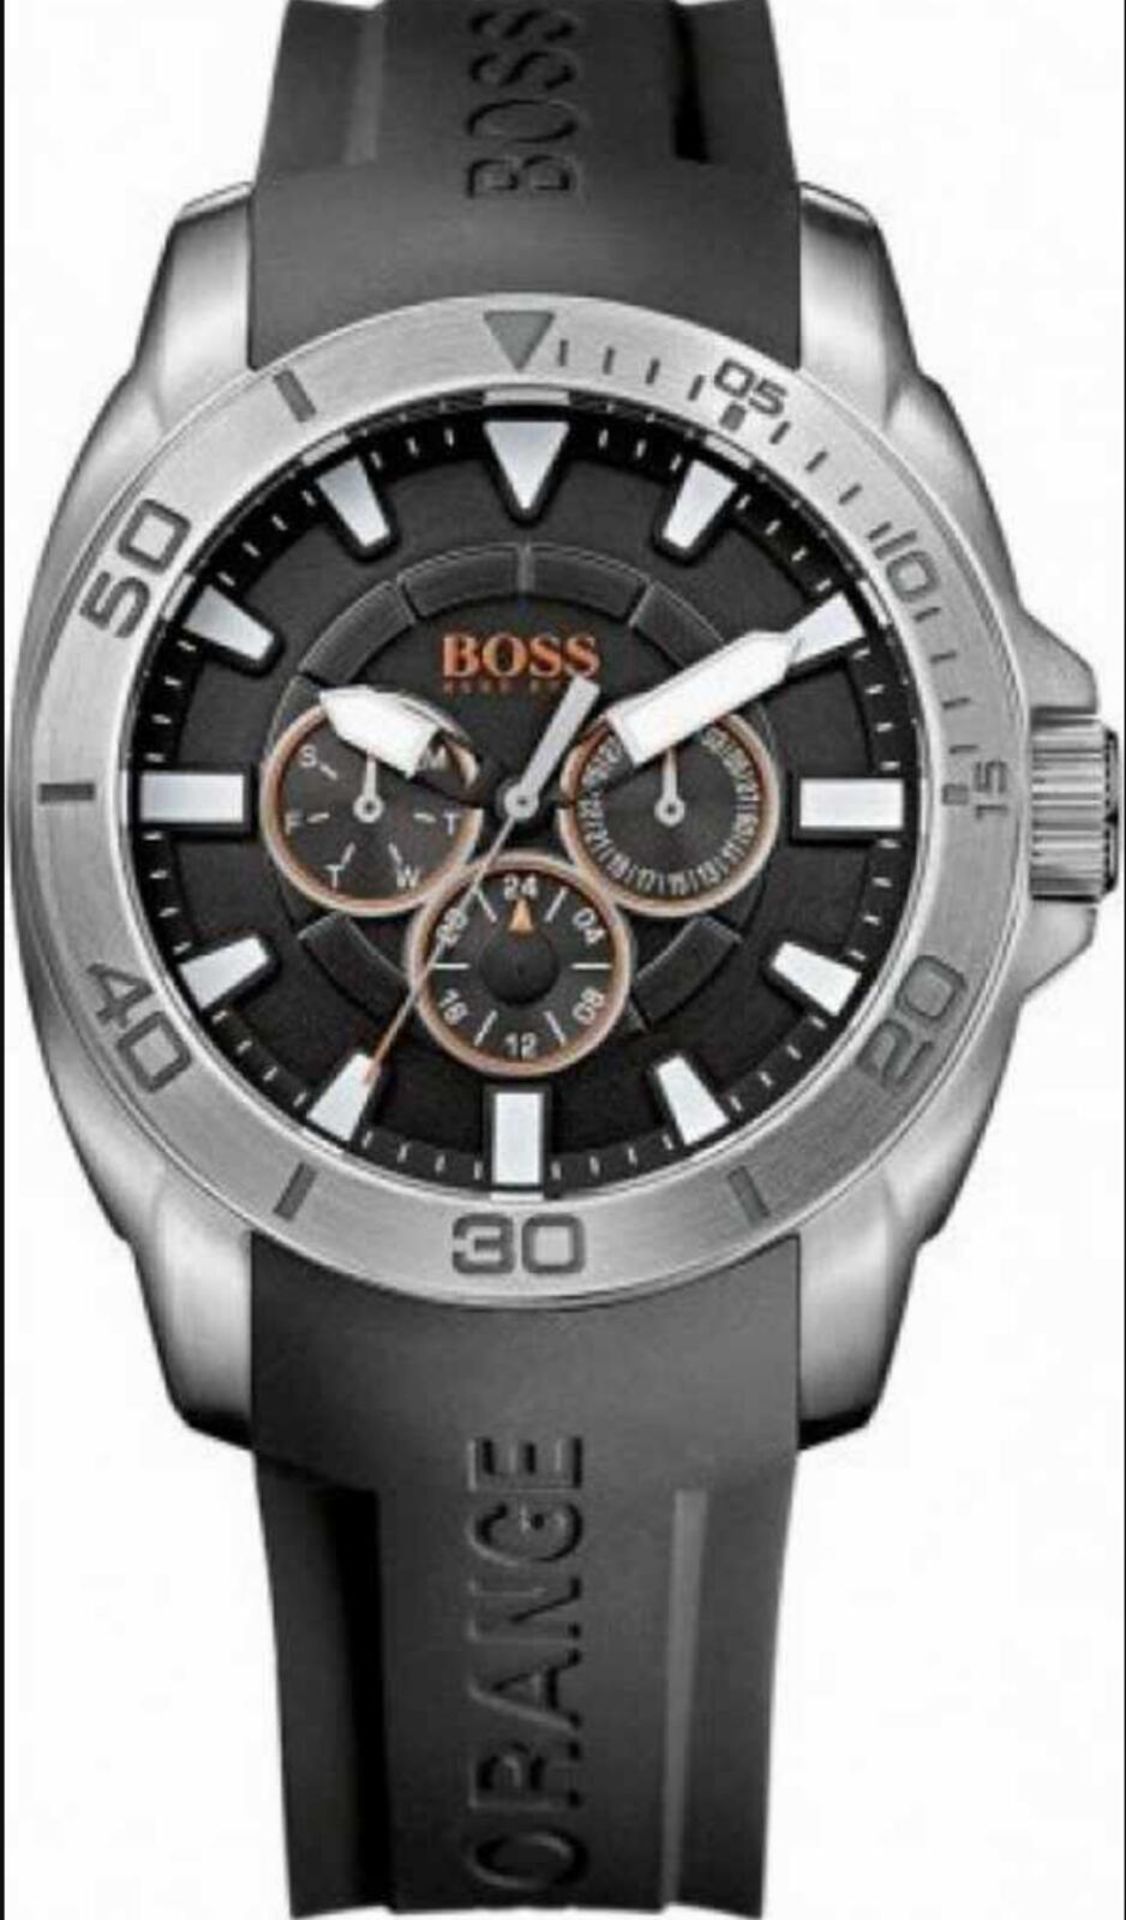 BRAND NEW HUGO BOSS 1512950, COMPLETE WITH ORIGINAL BOX AND MANUAL - Image 2 of 2